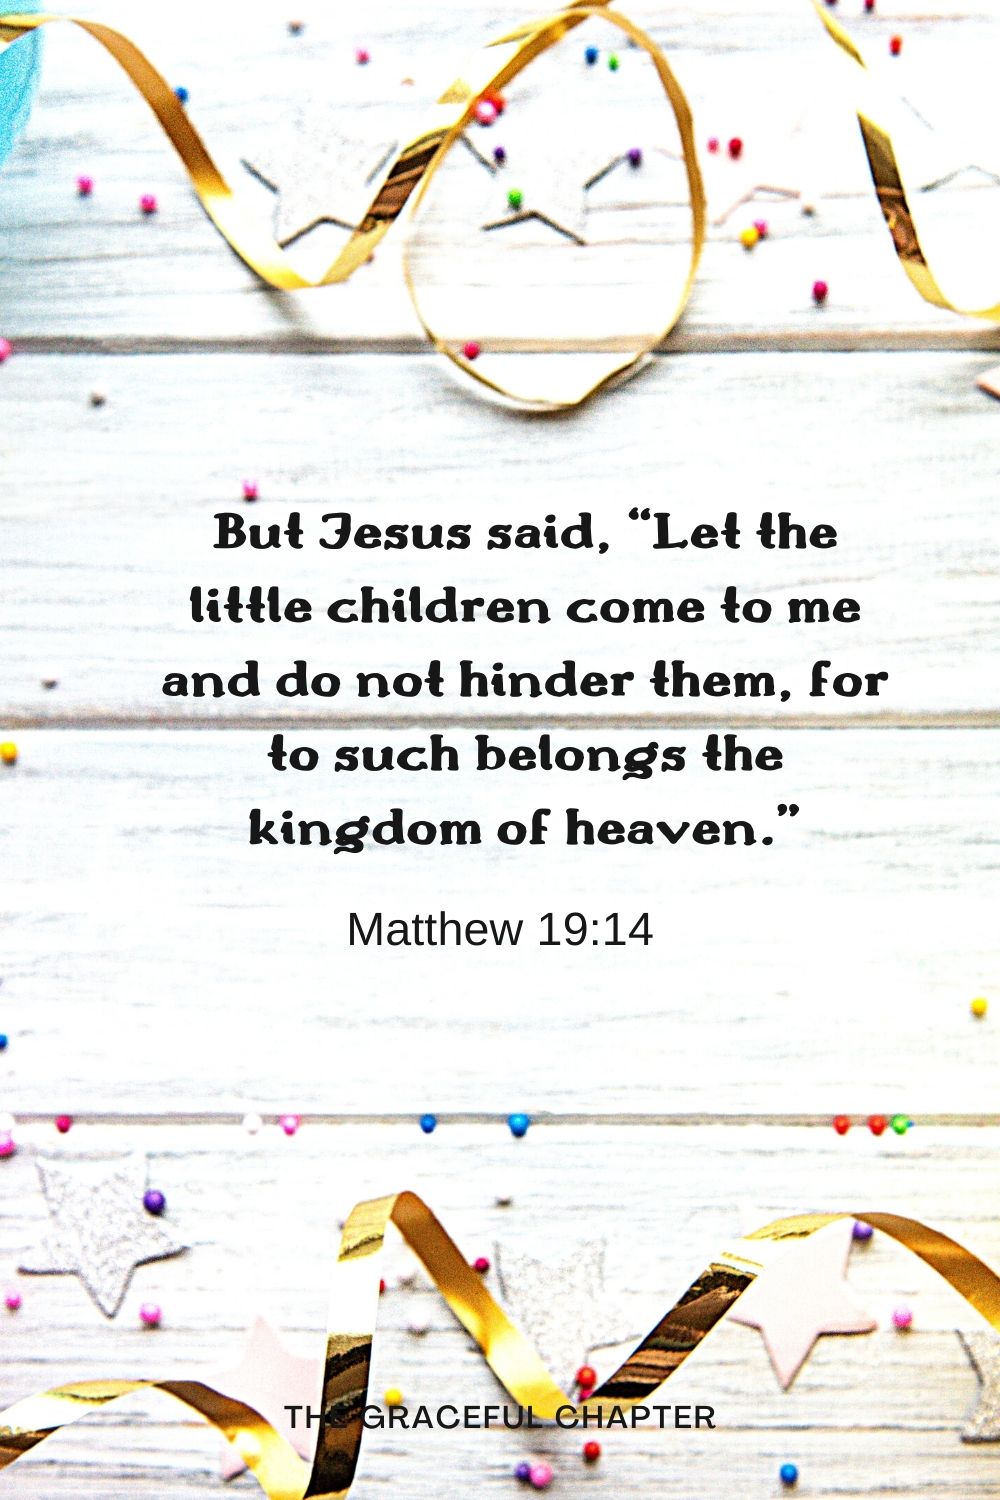 But Jesus said, “Let the little children come to me and do not hinder them, for to such belongs the kingdom of heaven.” But Jesus said, “Let the little children come to me and do not hinder them, for to such belongs the kingdom of heaven.” Matthew 19:14